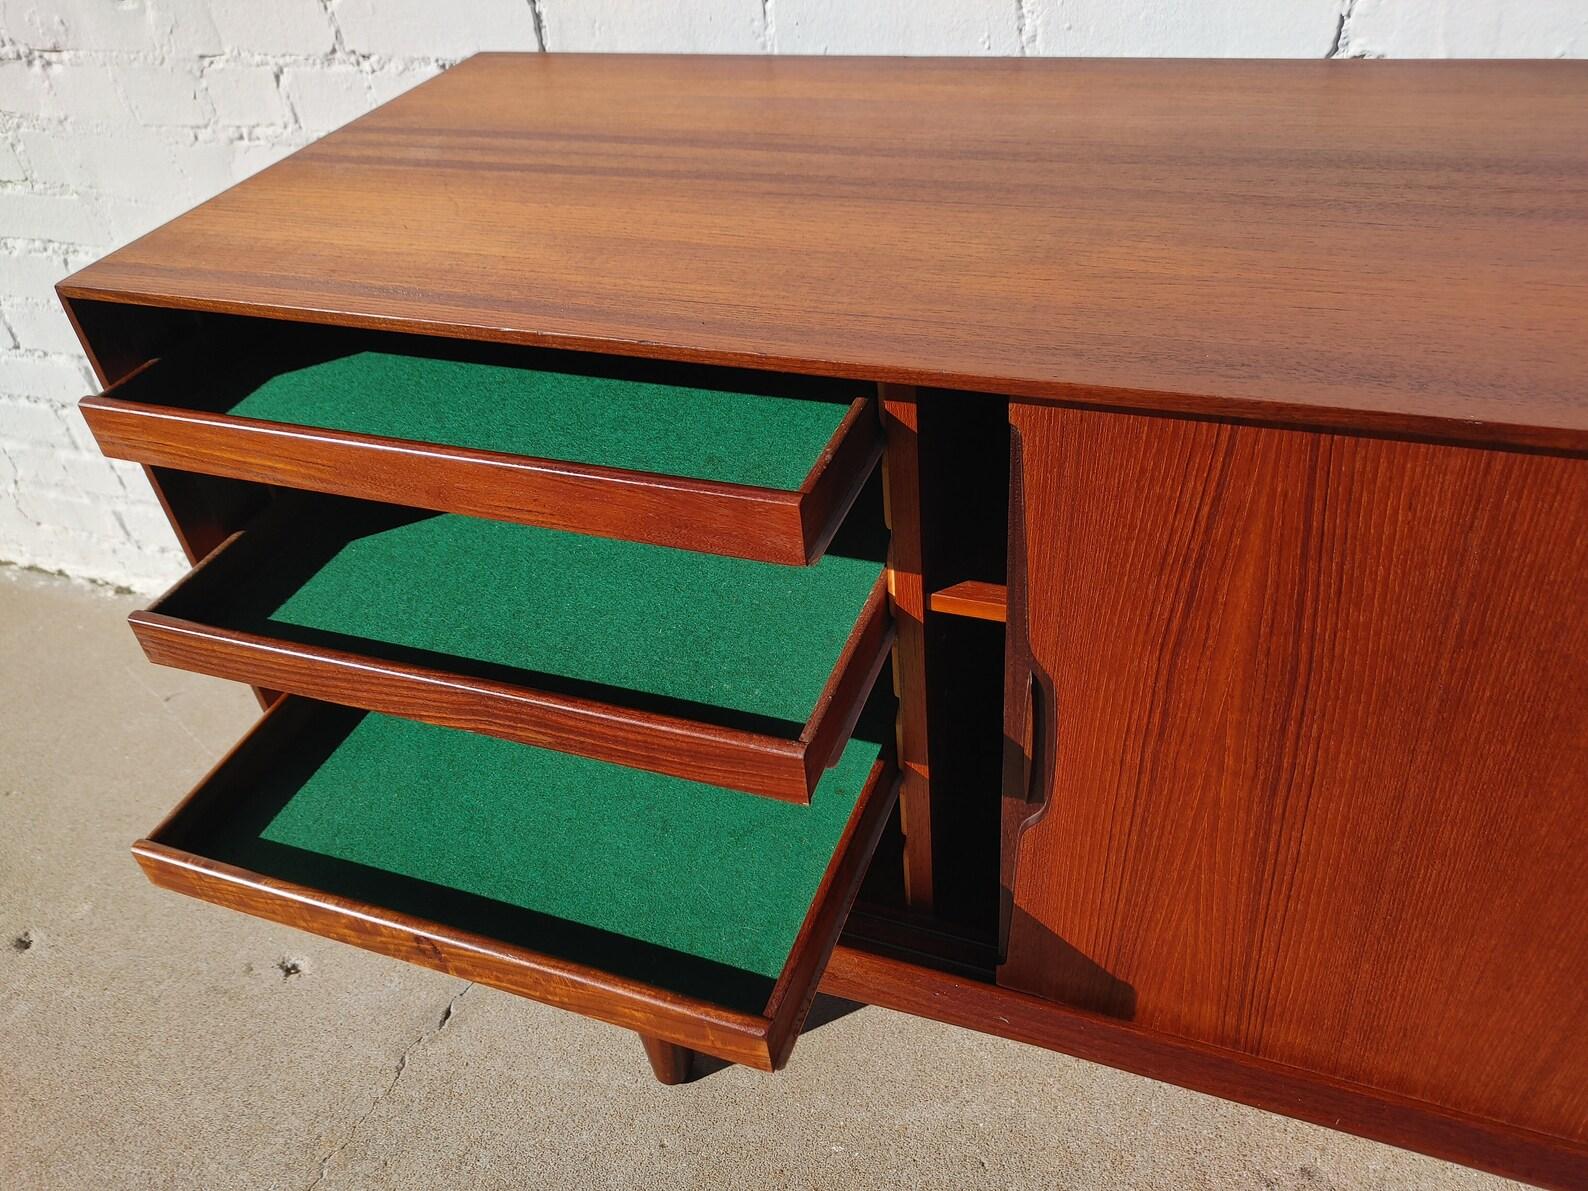 Mid Century Danish Modern Knud Nielson Sideboard

Above average vintage condition and structurally sound. Has some expected slight finish wear and scratching. Outdoor listing pictures might appear slightly darker or more red than the item does